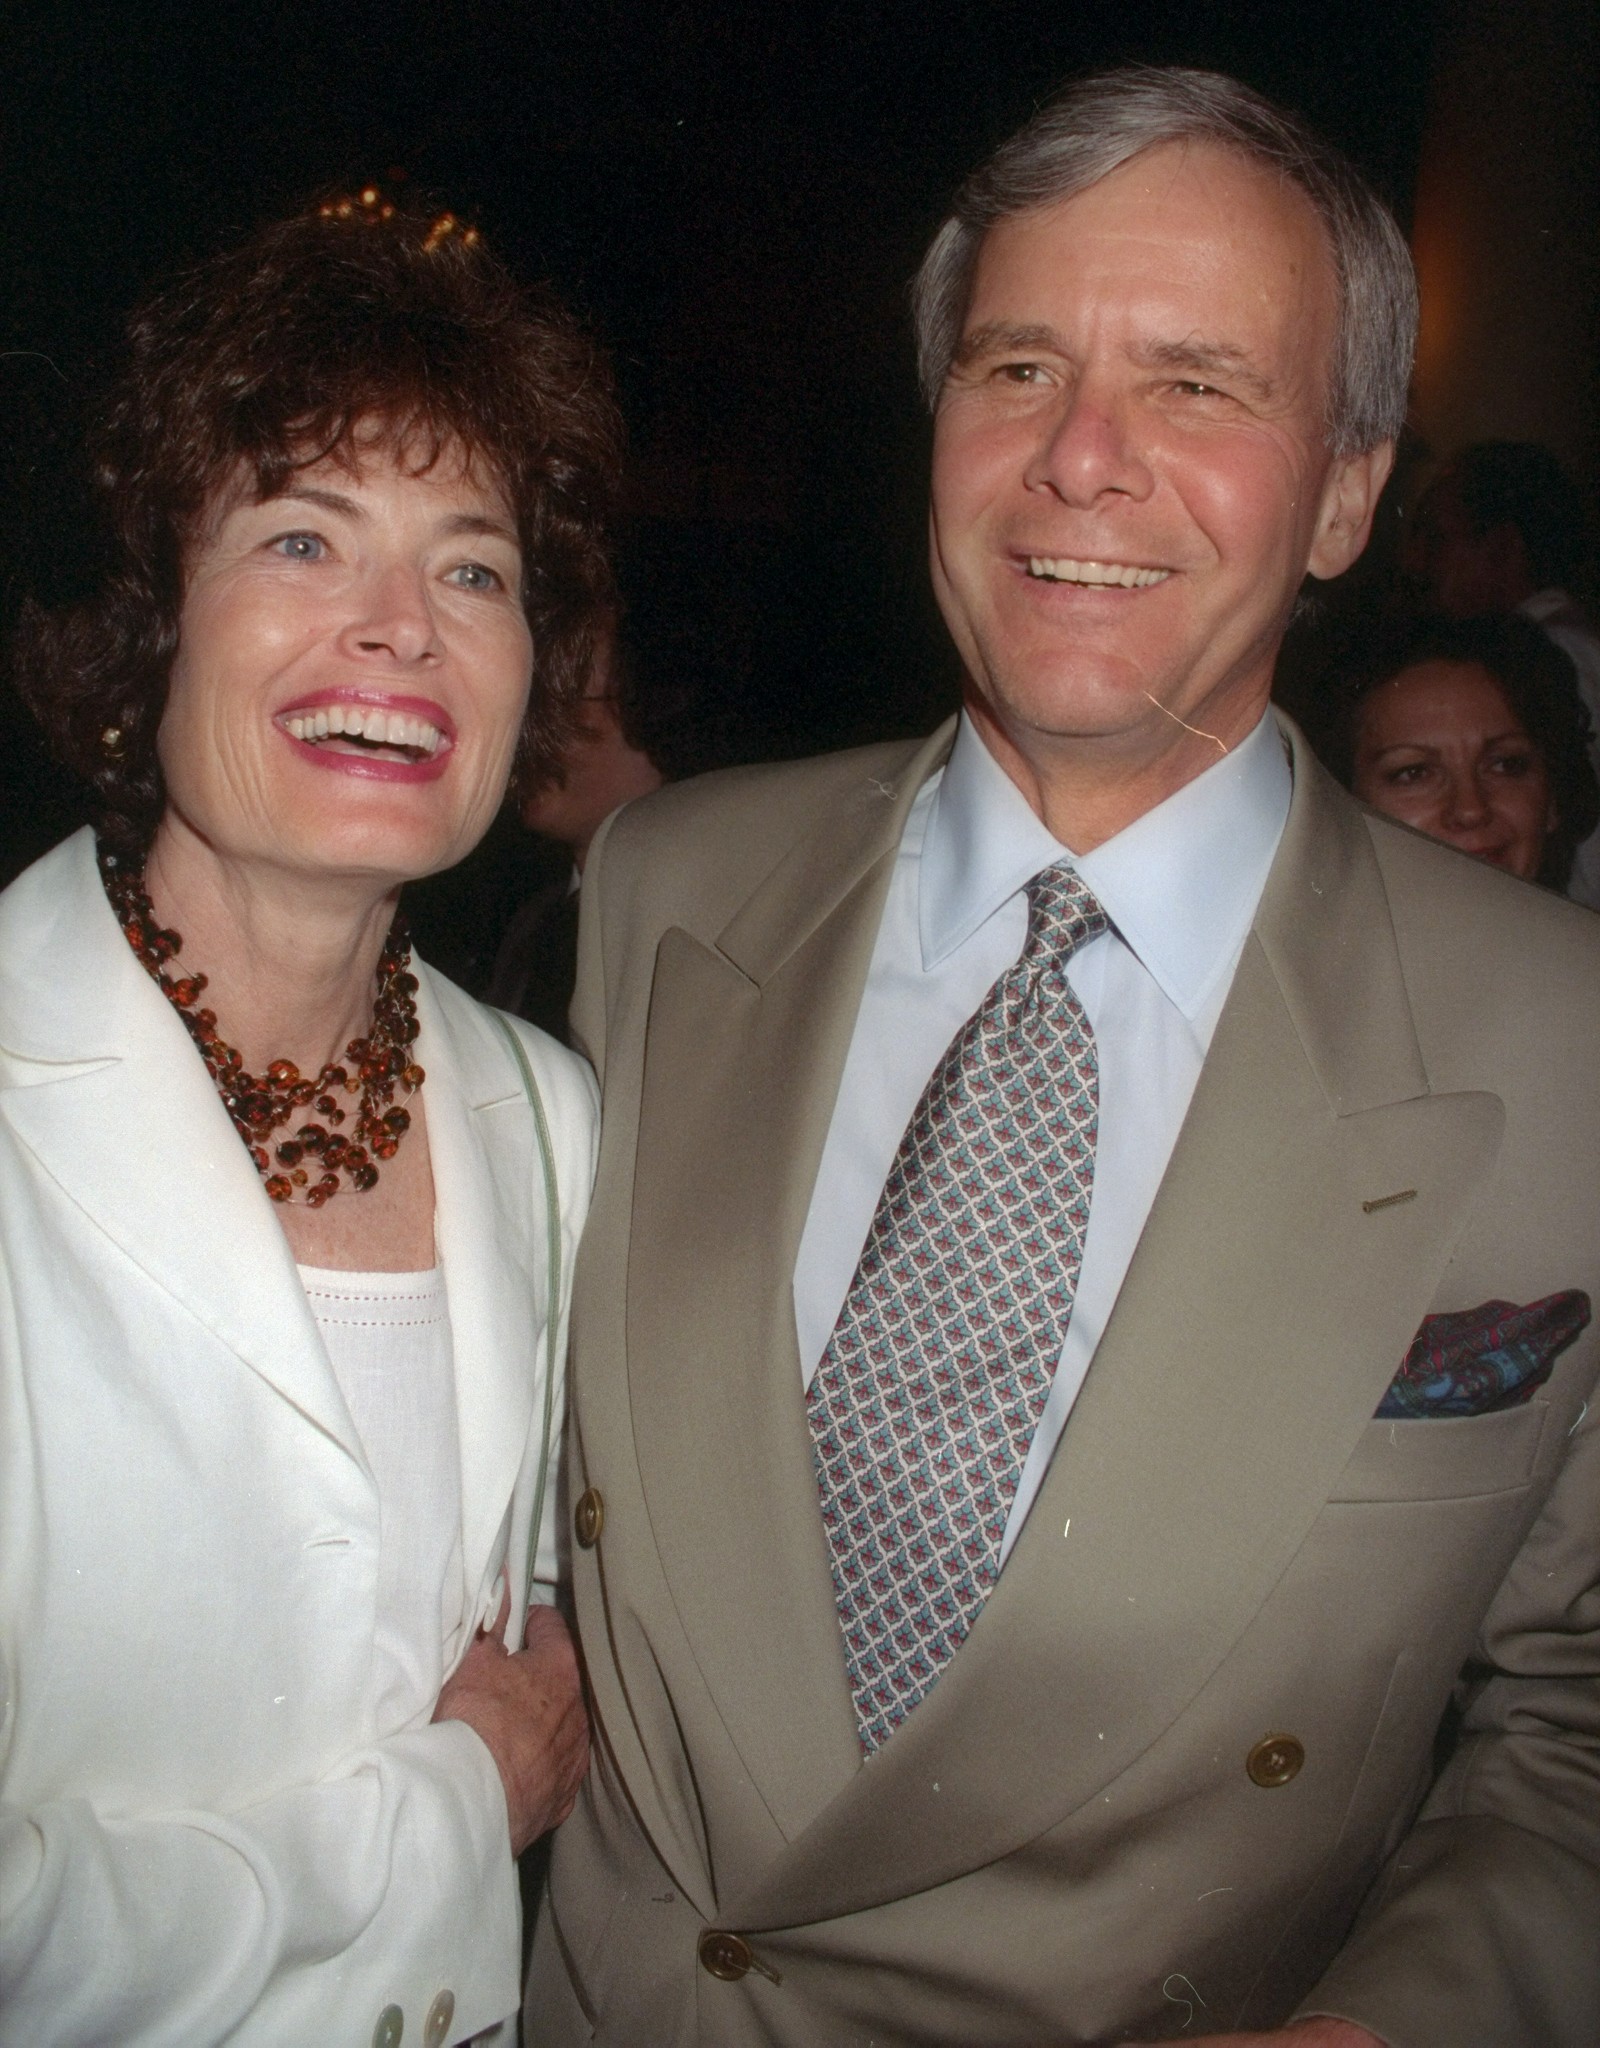 Meredith Auld and Tom Brokaw at Dr. Hunter S. Thompson's book party at the Players Club on June 12, 1997 | Source: Getty Images